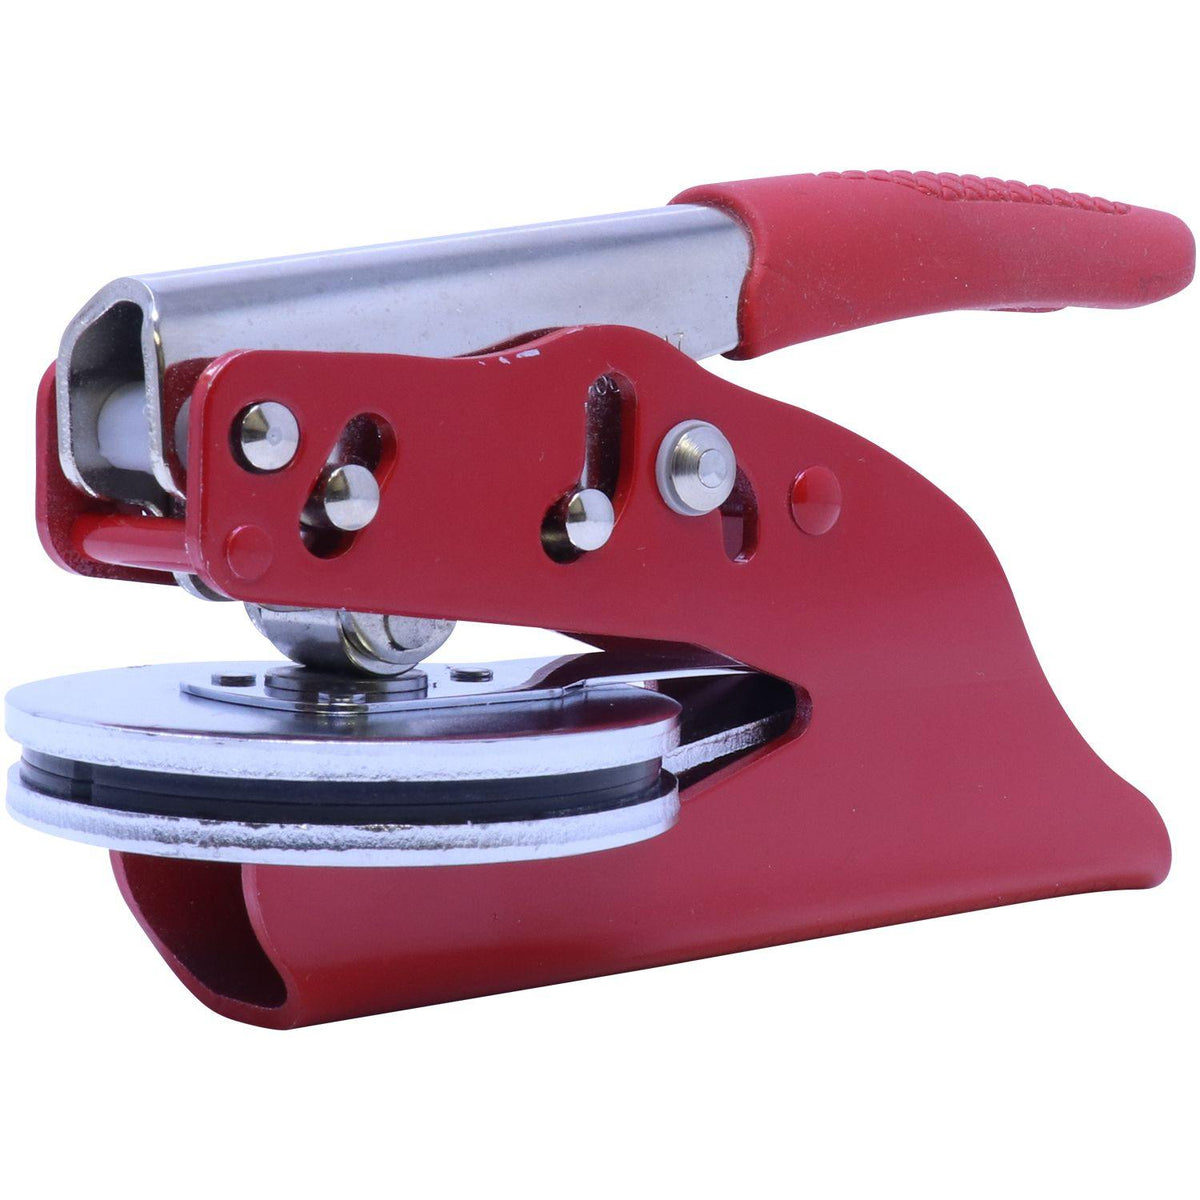 Forester Red Soft Seal Embosser - Engineer Seal Stamps - Embosser Type_Handheld, Embosser Type_Soft Seal, Type of Use_Professional